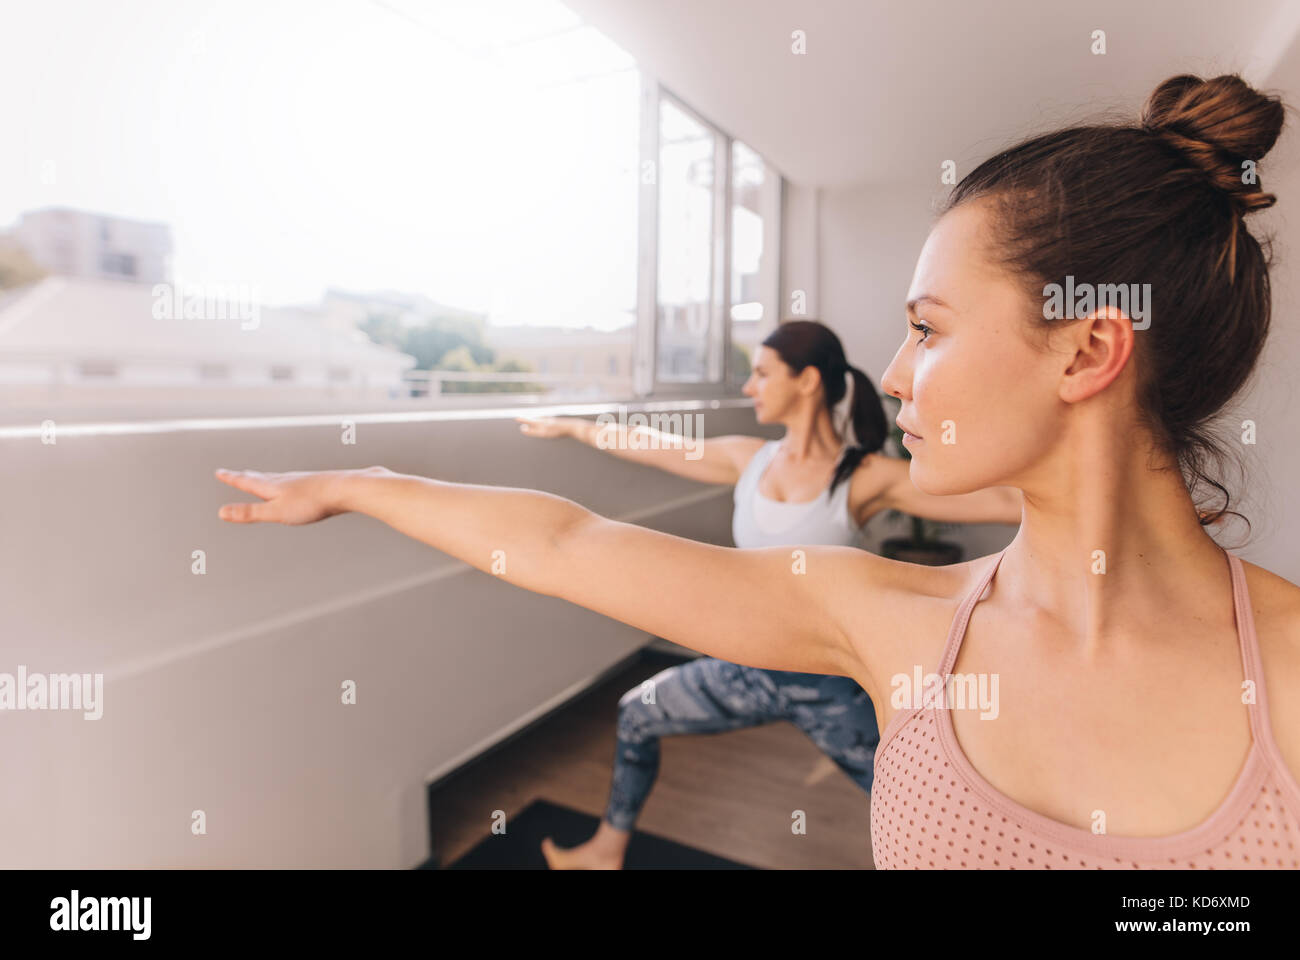 Women doing yoga in warrior pose at studio. Young fitness females working out indoors. Stretching yoga workout in gym class. Stock Photo